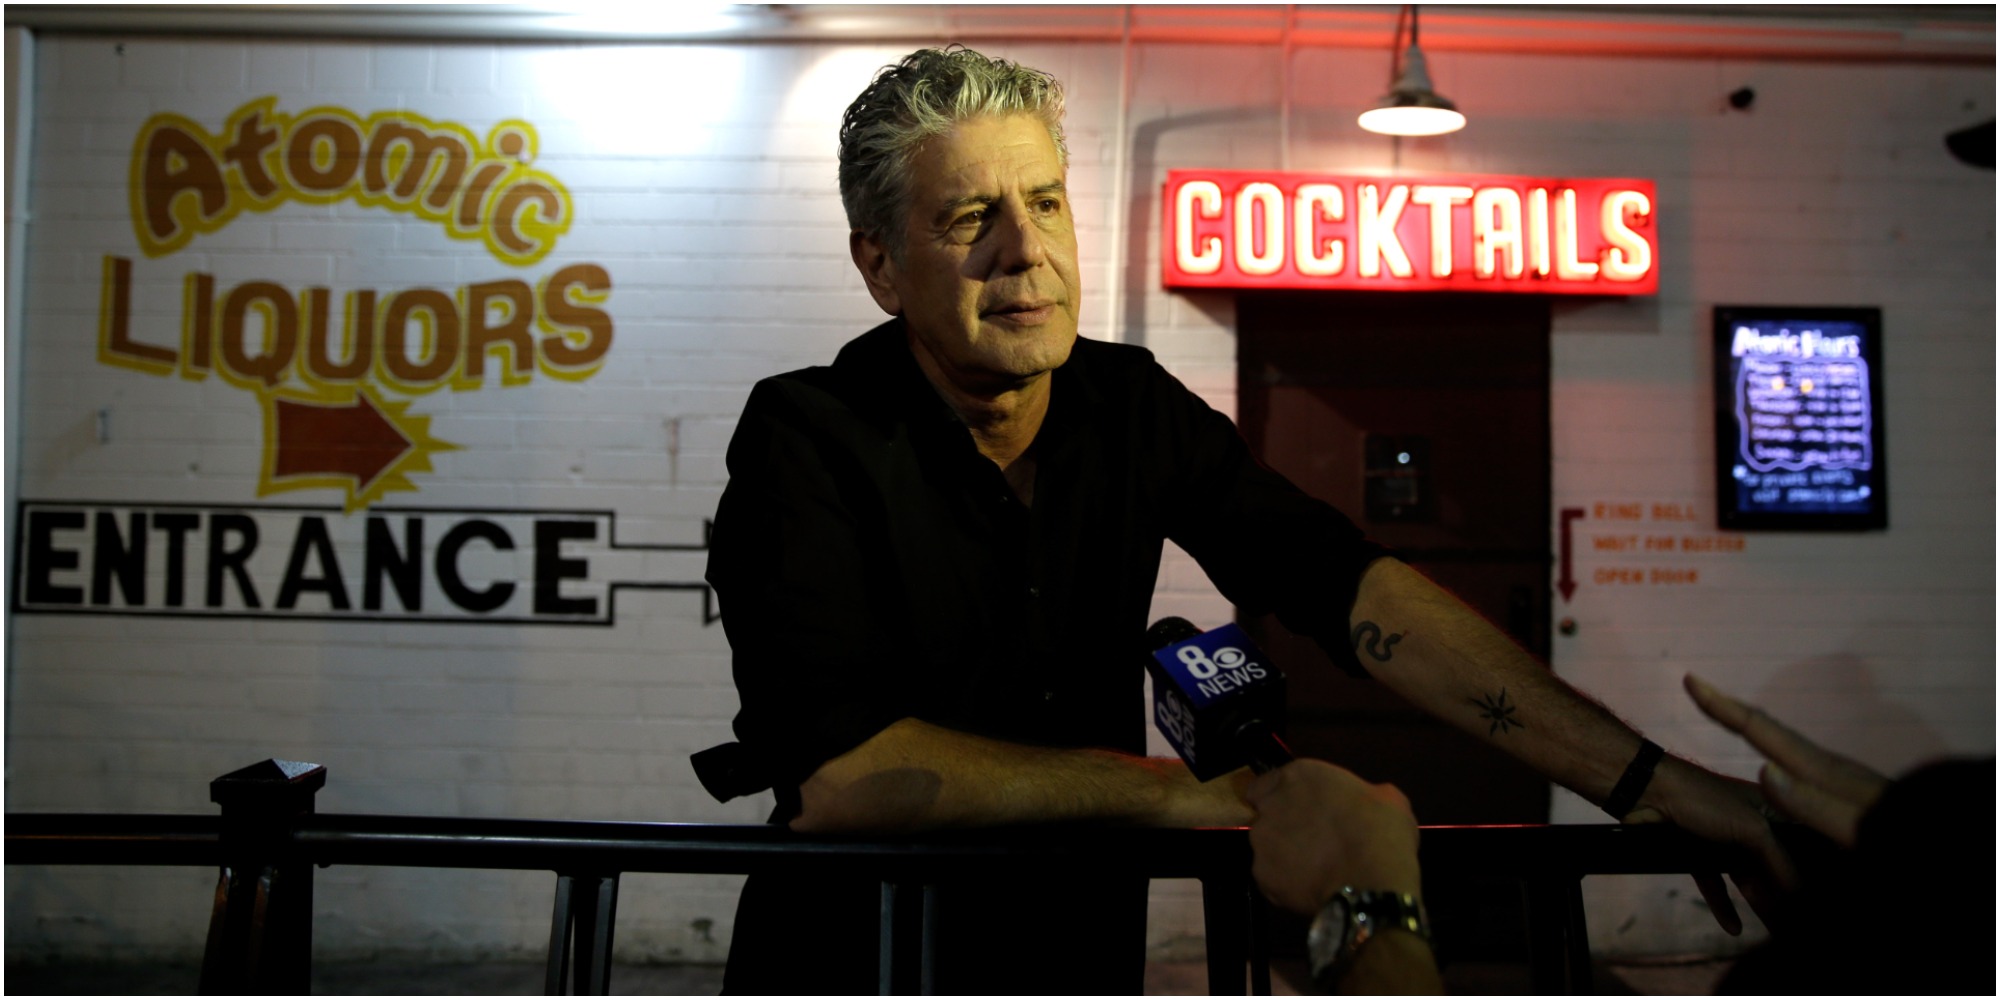 TV Personality Anthony Bourdain attends "Parts Unknown Last Bite" Live CNN Talk Show hosted by Anthony Bourdain at Atomic Liquors on November 10, 2013 in Las Vegas, Nevada.